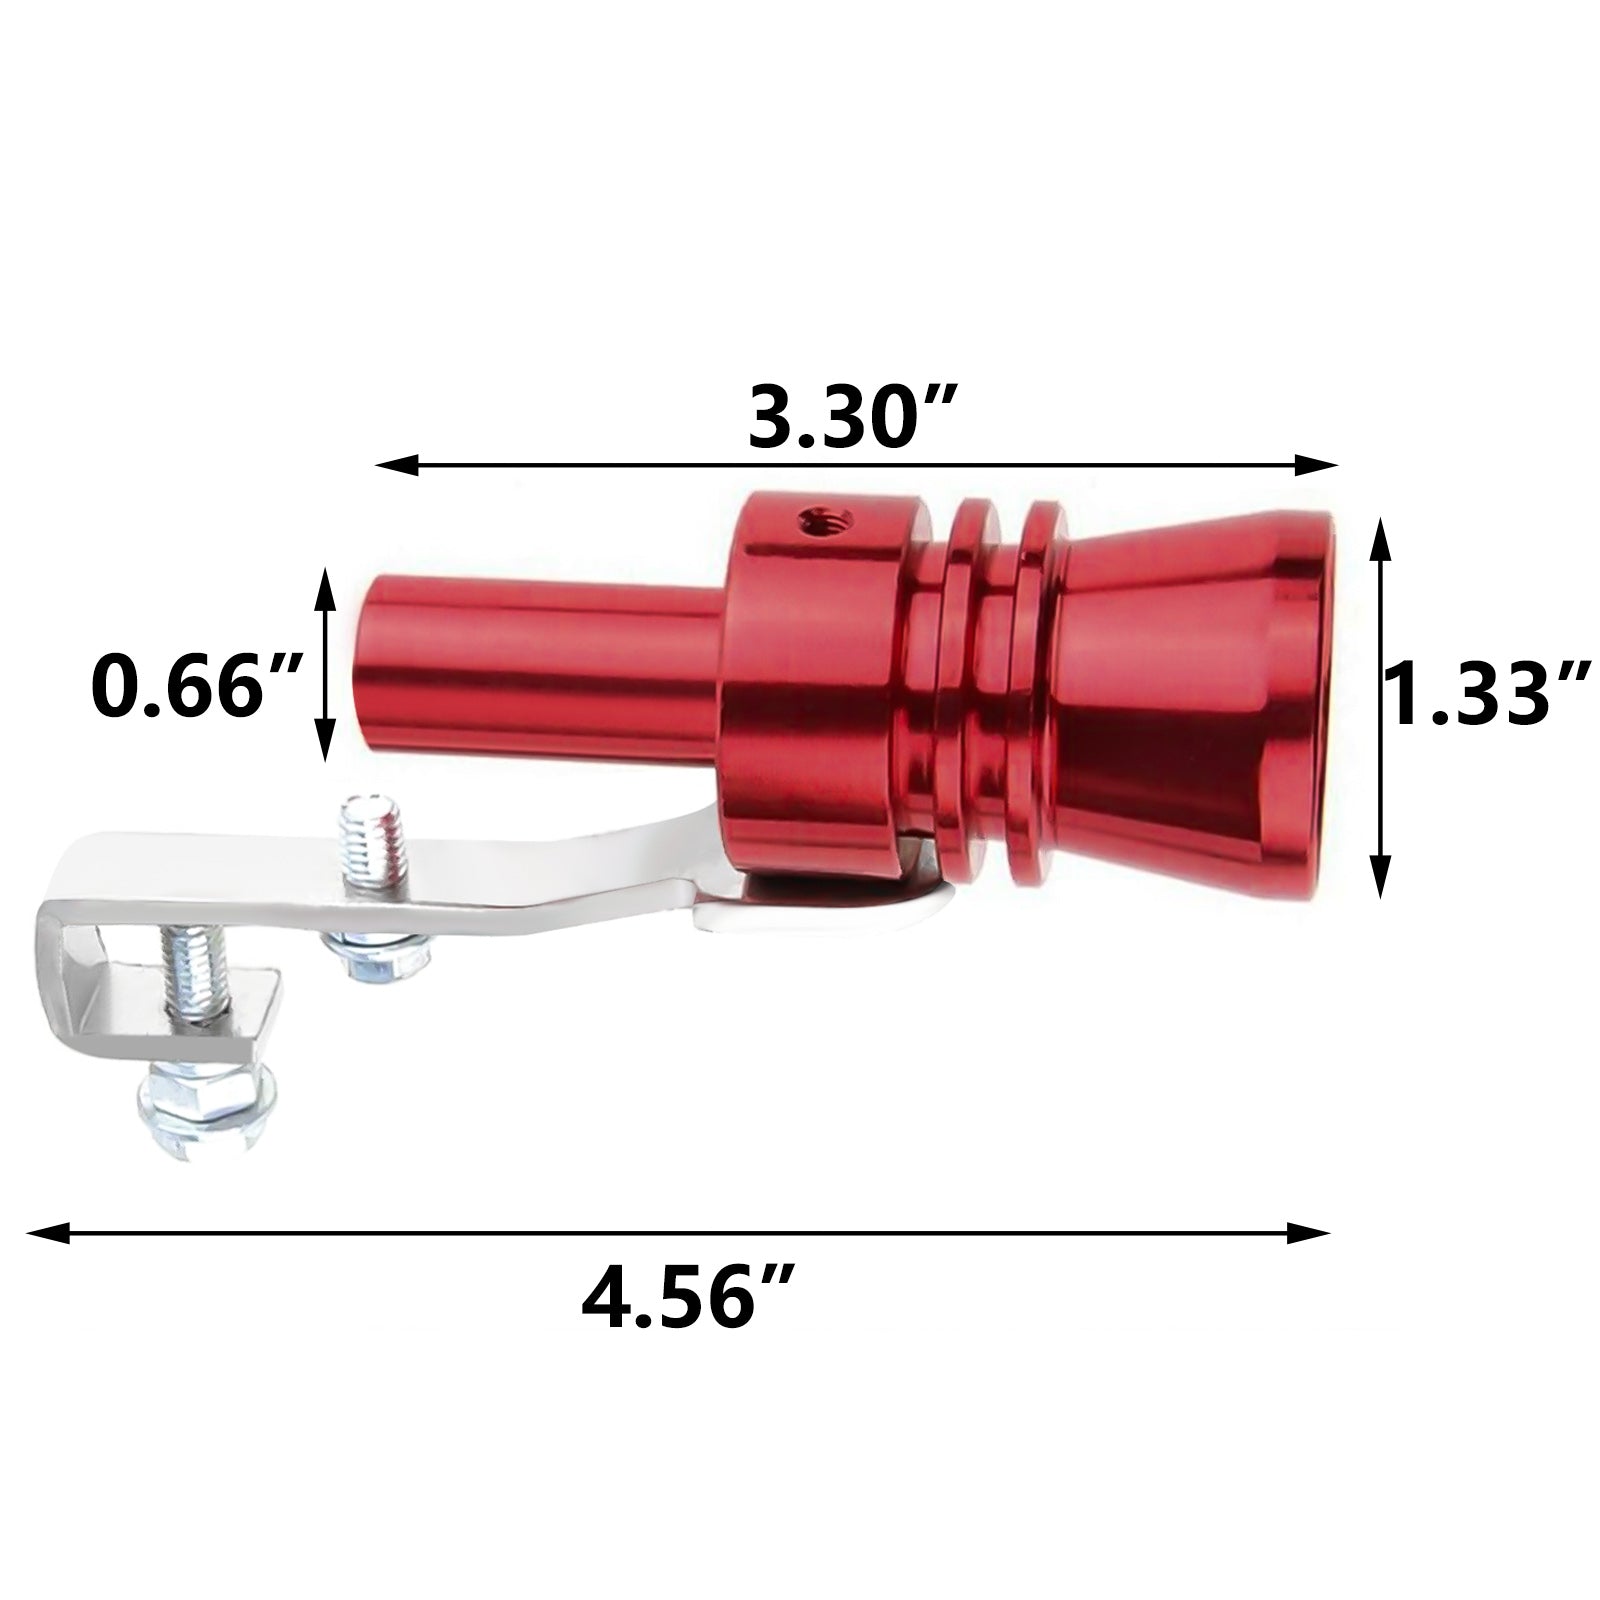 Turbo Sound Whistle Exhaust Pipe Tailpipe Blow Off Valve Aluminum Size  44-55mm – Car Shine Systems